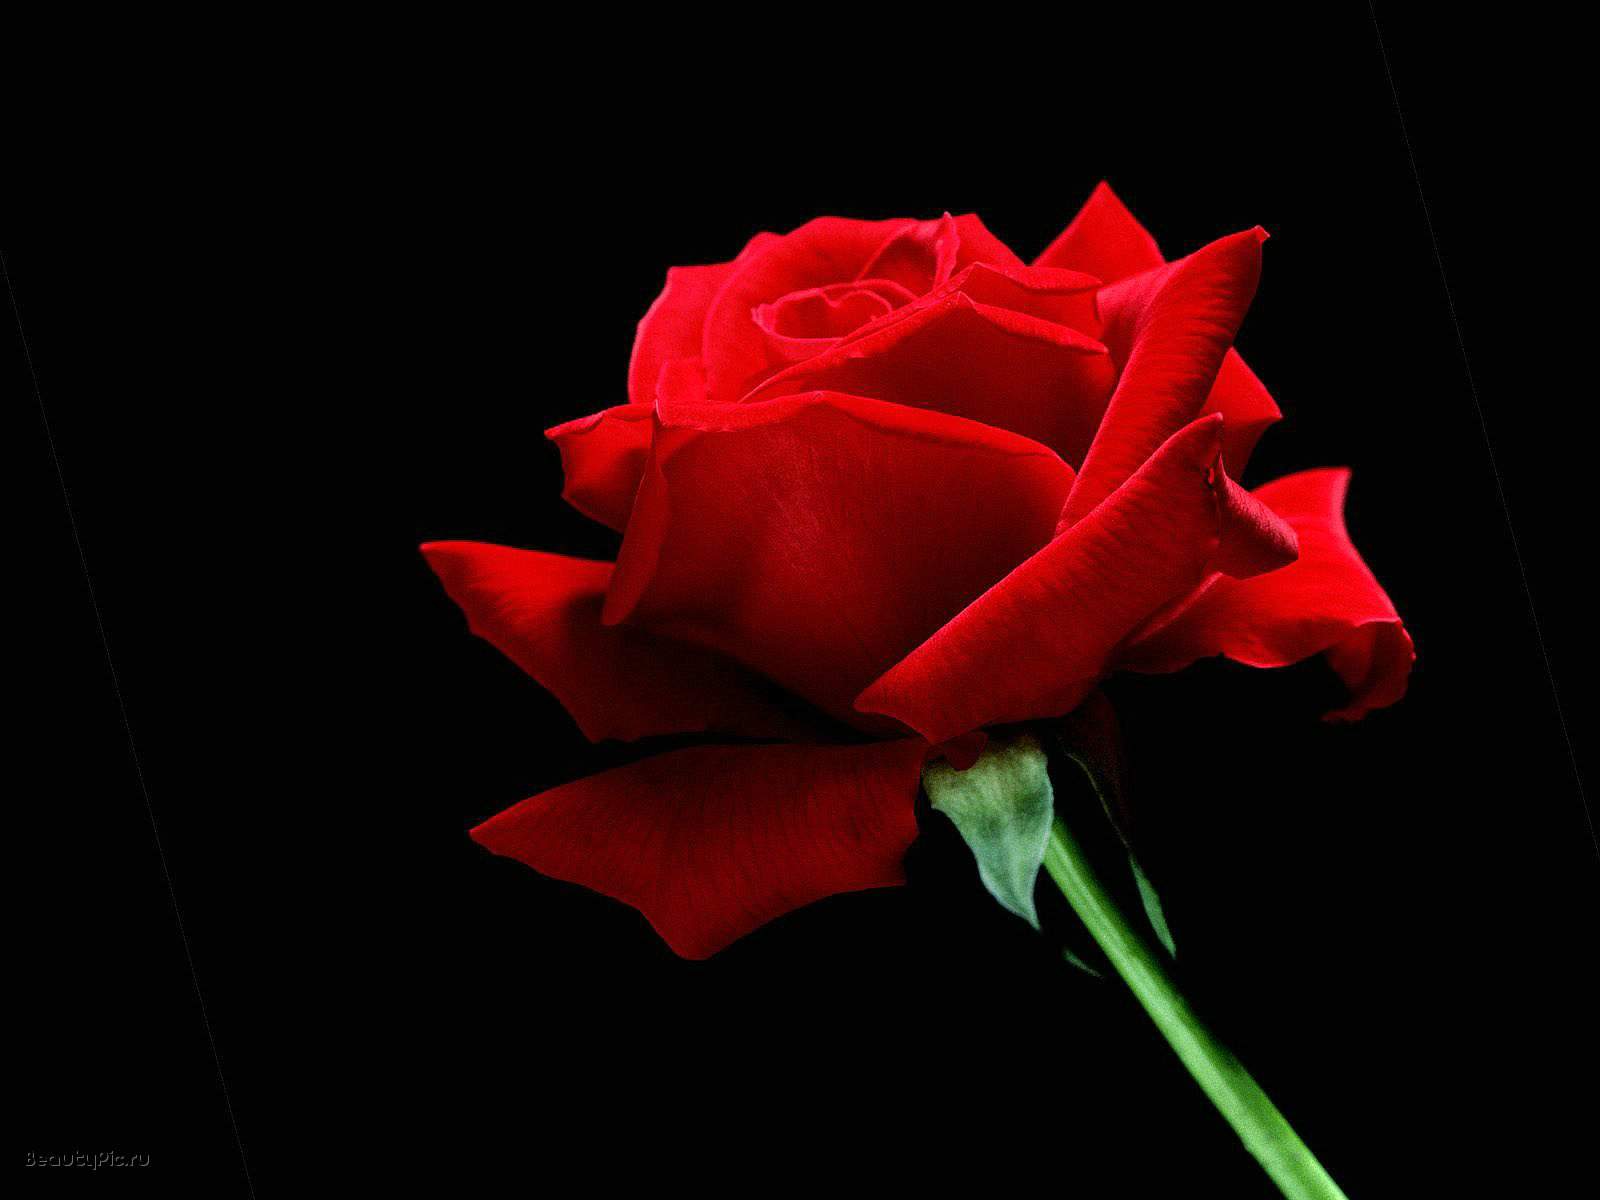 Black And White Wallpaper Red Rose On Background